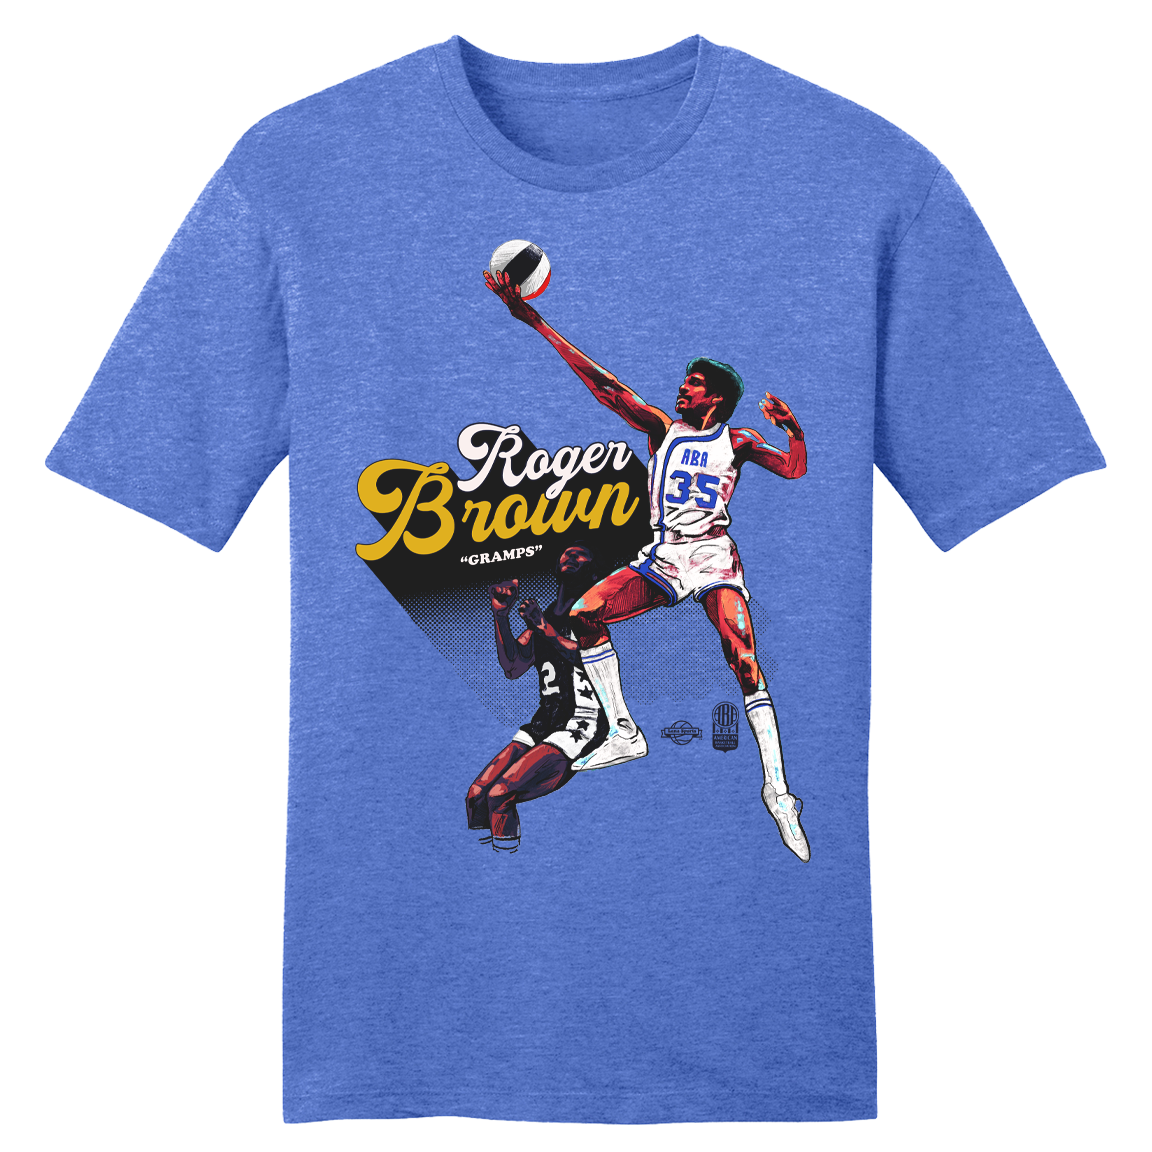 Official Roger Brown ABA Player Tee